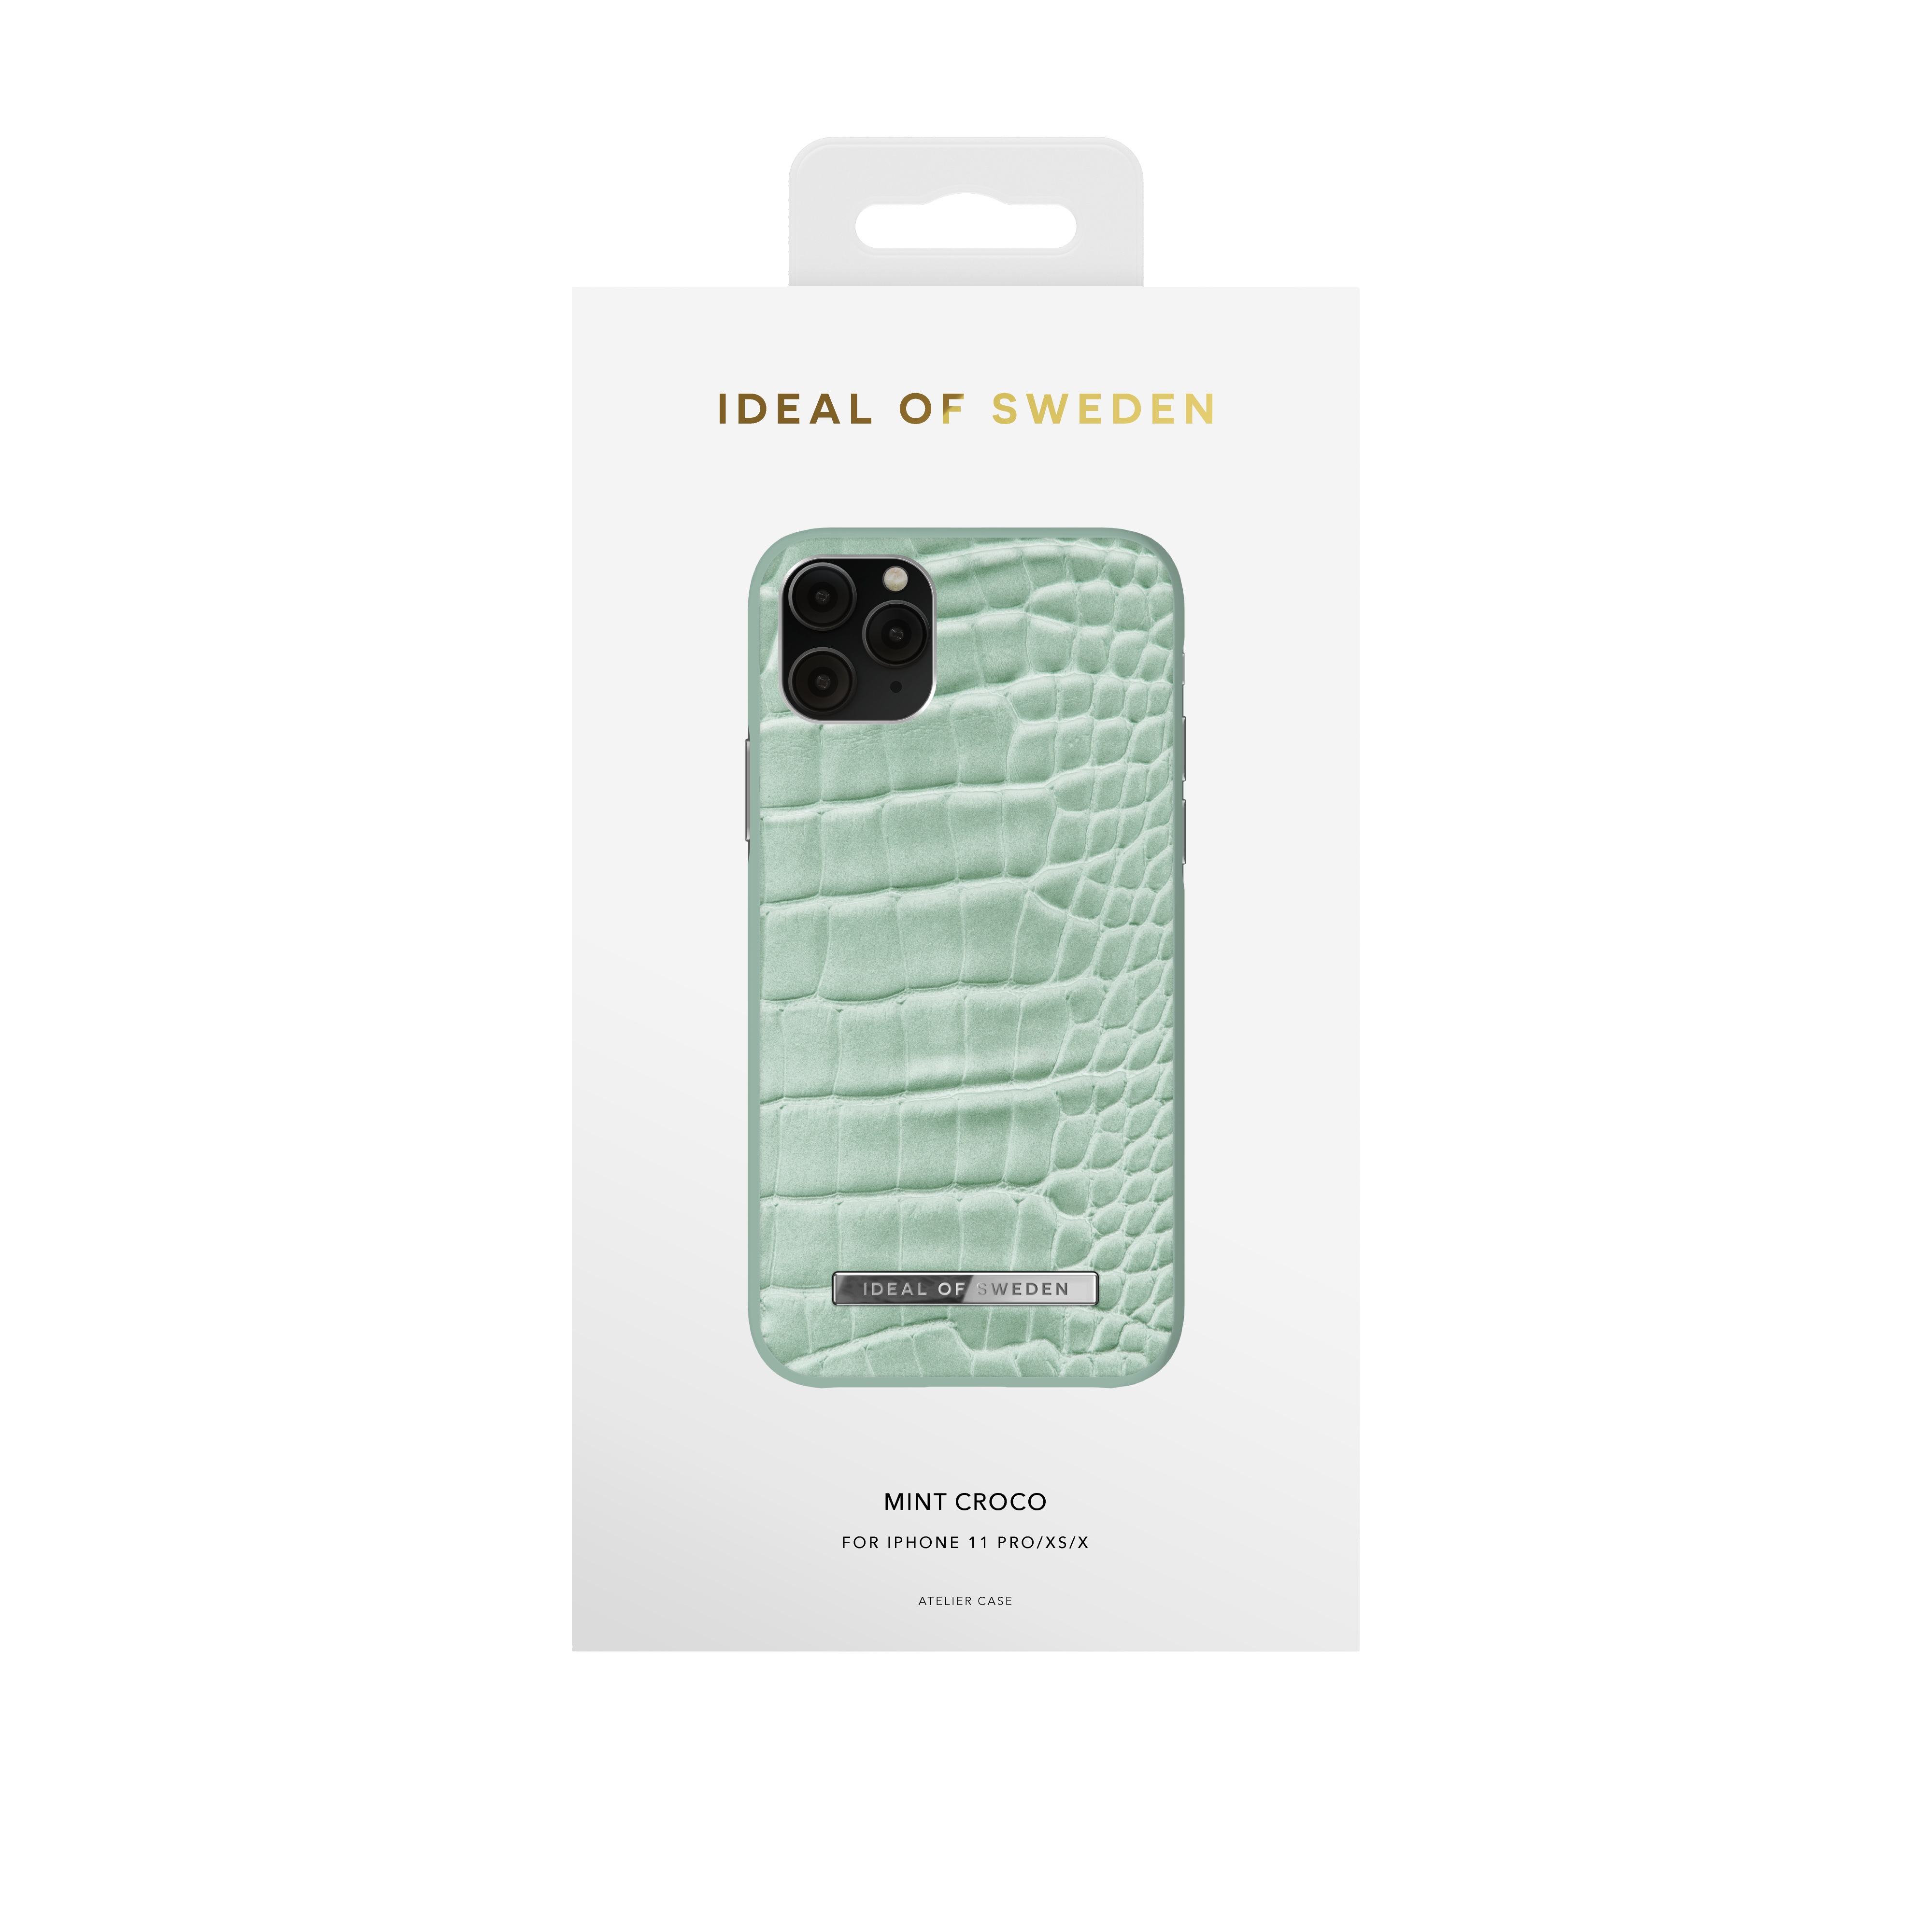 iPhone Croco iPhone X, IDACSS21-I1958-261, XS, iPhone OF 11 SWEDEN Mint Backcover, Apple, Pro, IDEAL